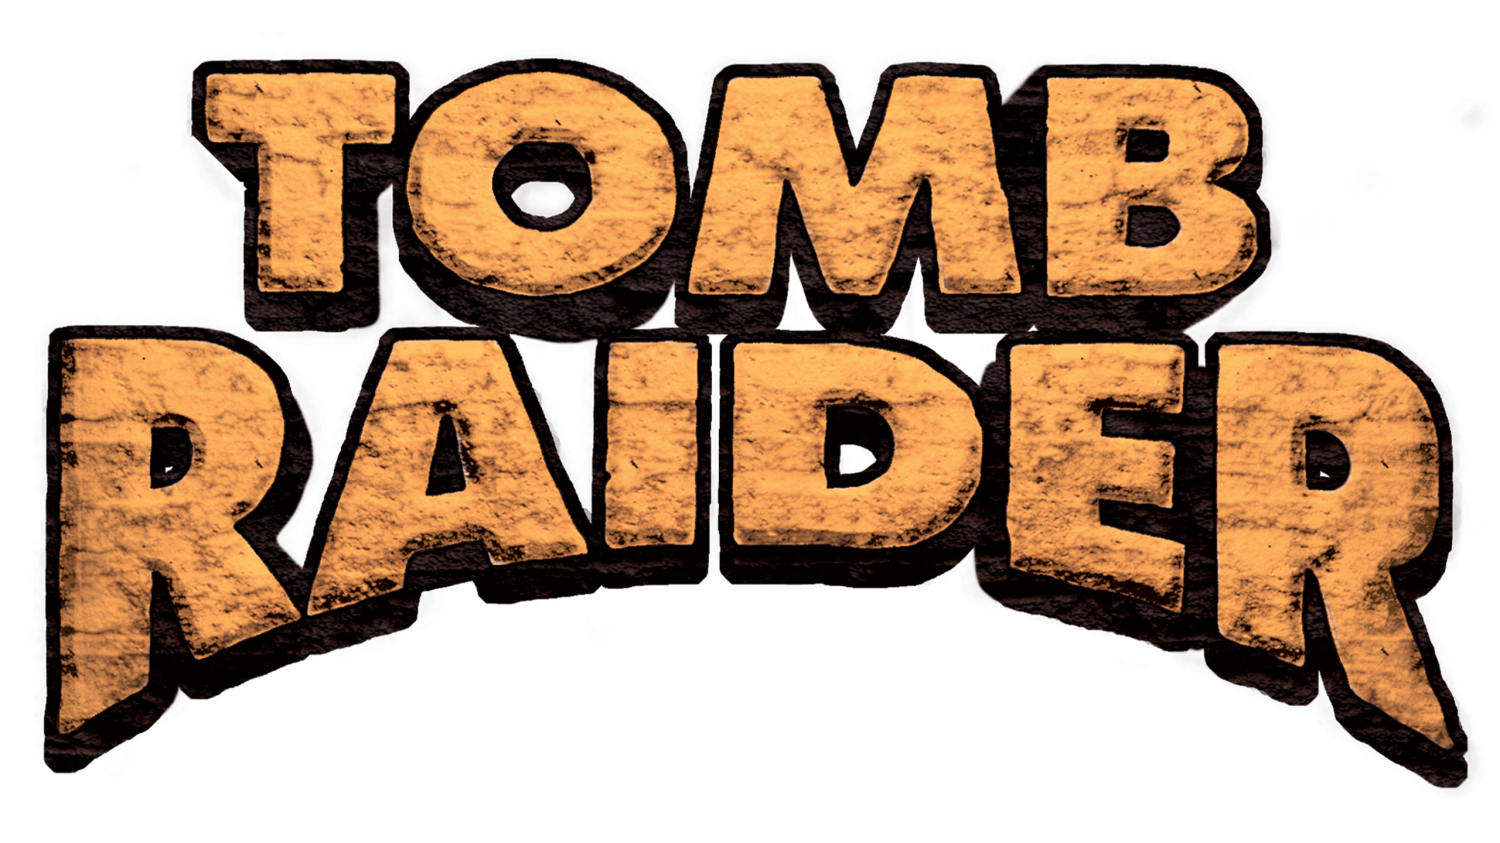 All Tomb Raider games have sold 95,000,000+ copies. Gaming news